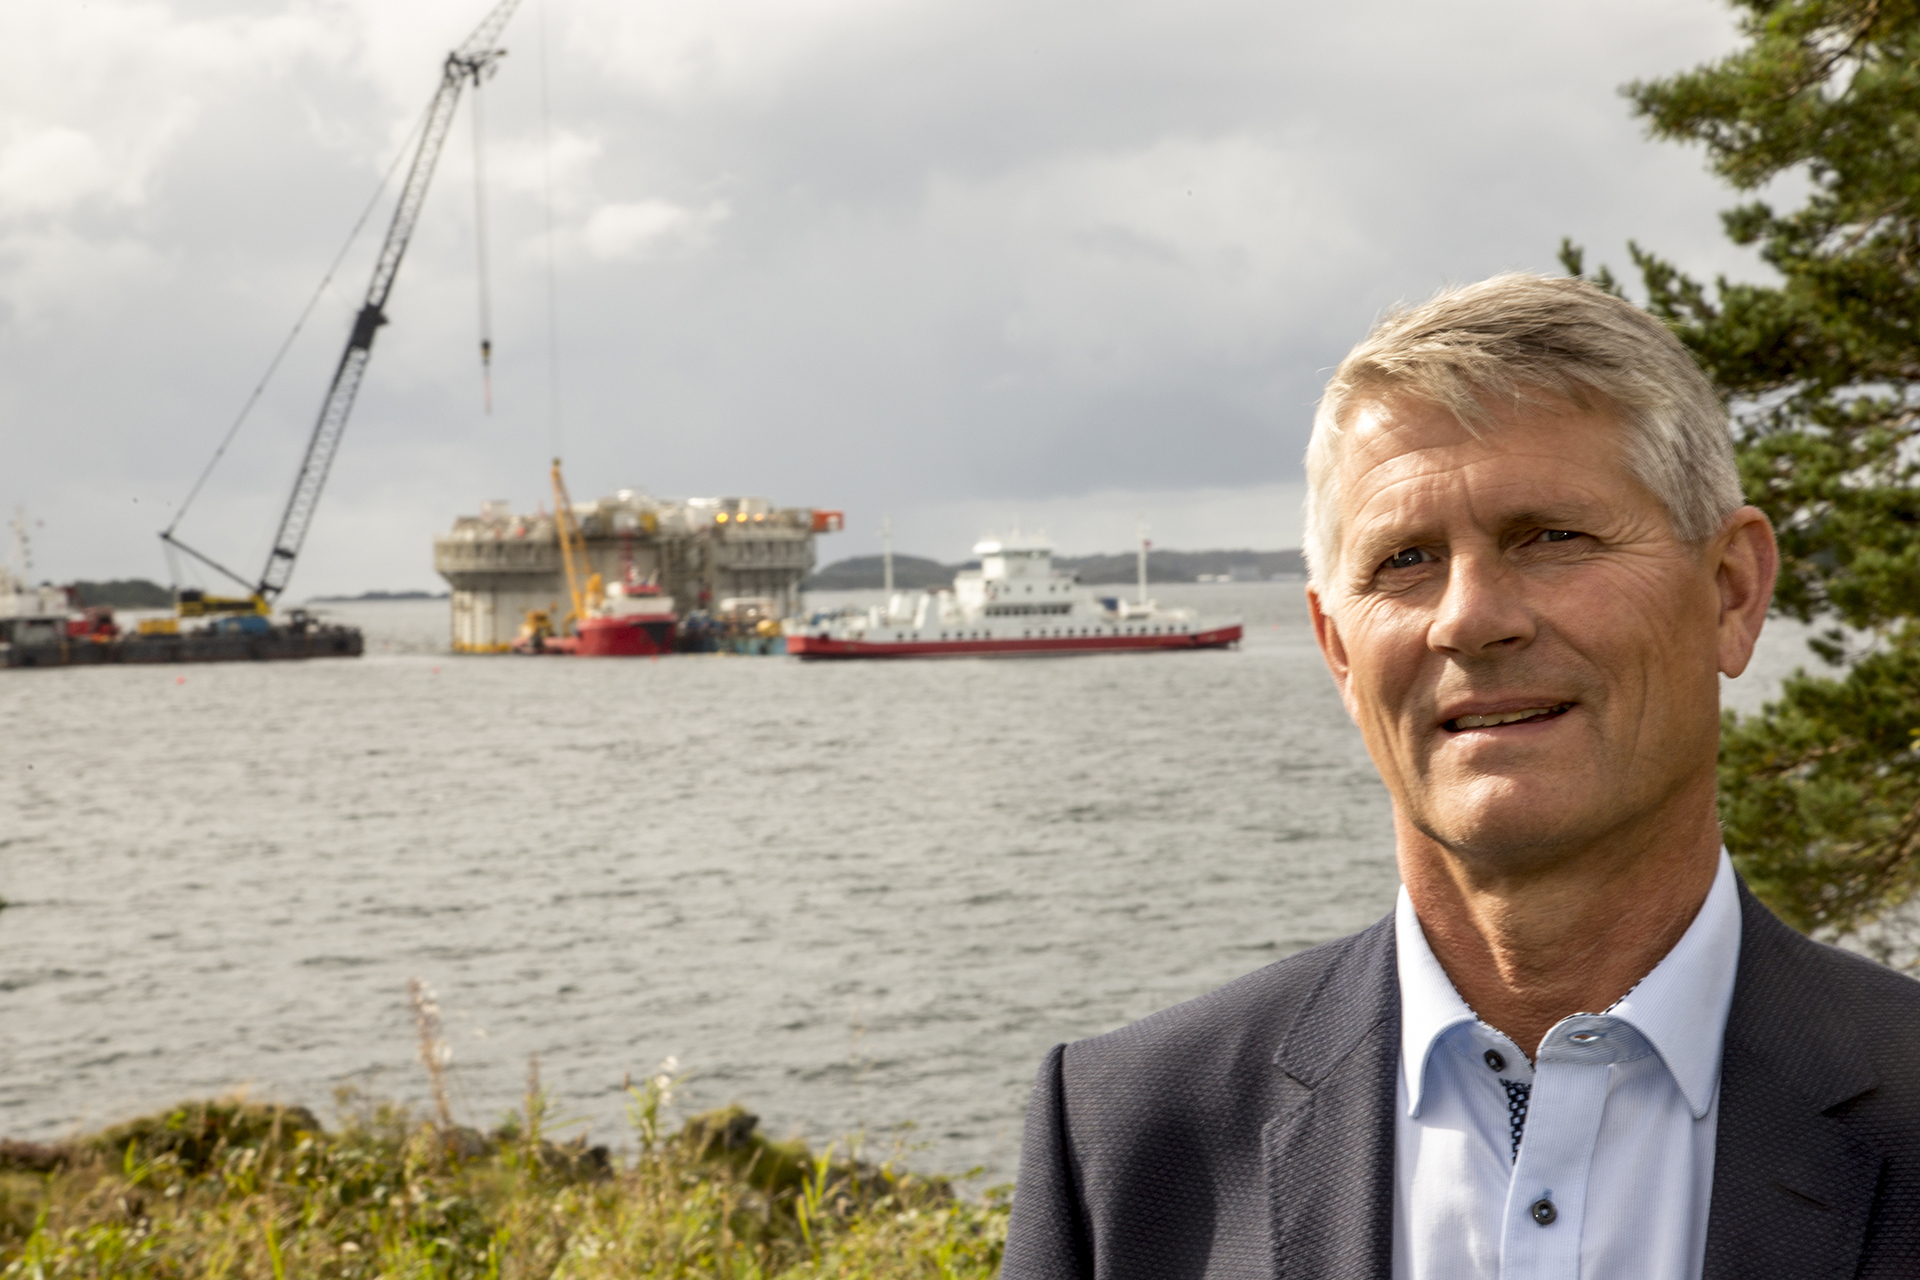 Biggest job. Torolf Christensen is Equinor’s project director for the Aasta Hansteen platform. Viewed overall, this is the biggest job he has tackled in his career. He reports heavy pressure from outside interests, particularly in northern Norway.